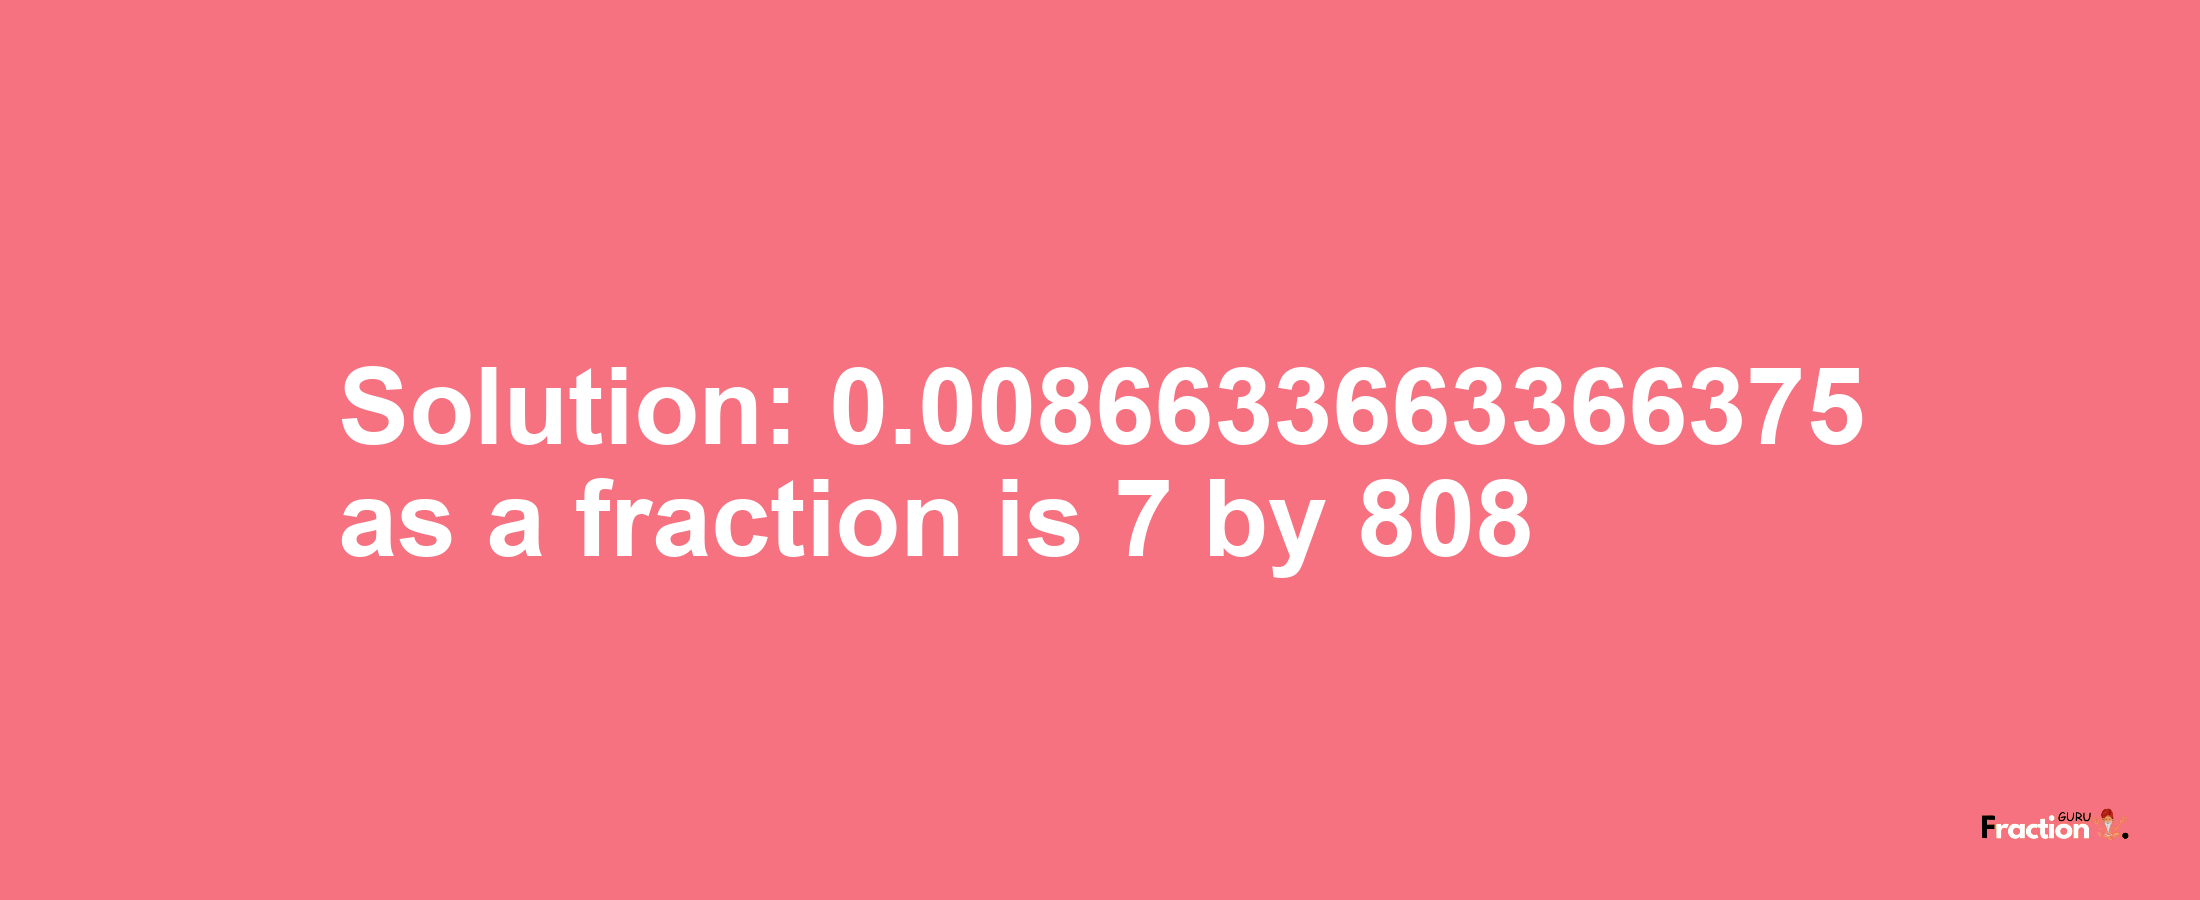 Solution:0.0086633663366375 as a fraction is 7/808